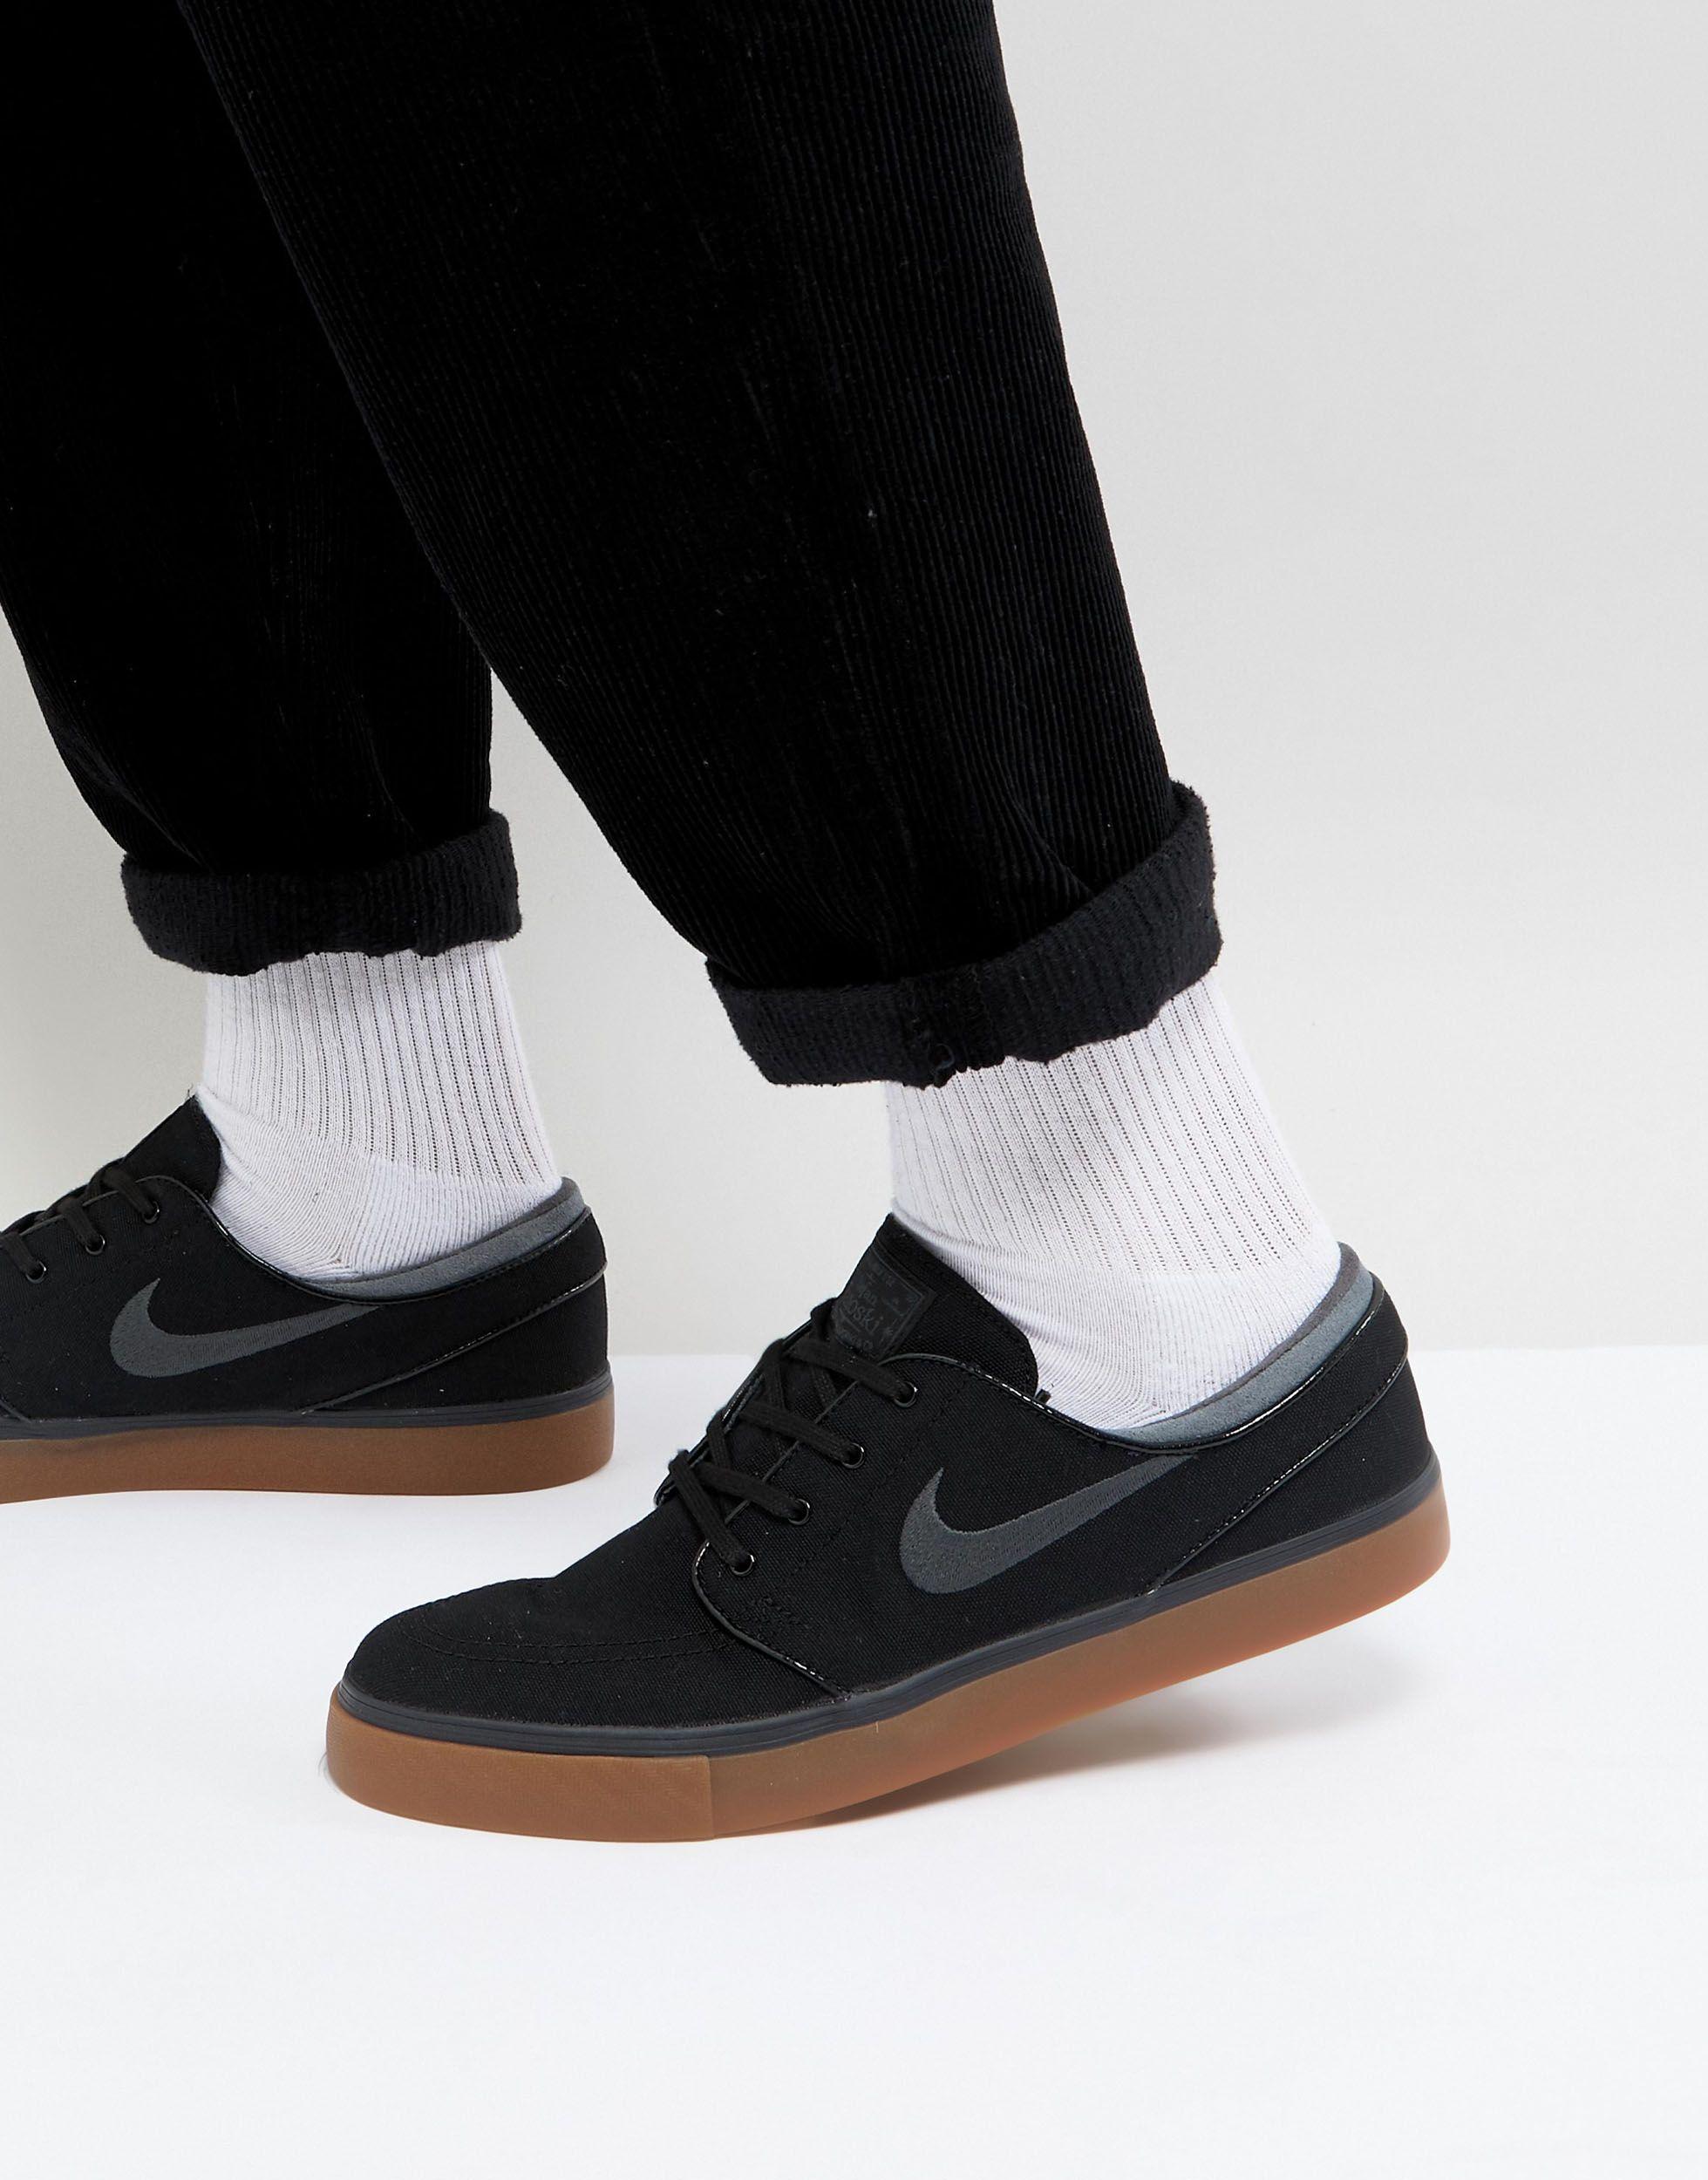 Nike Stefan Janoski Canvas Trainers With Gum Sole in Black for Men - Lyst